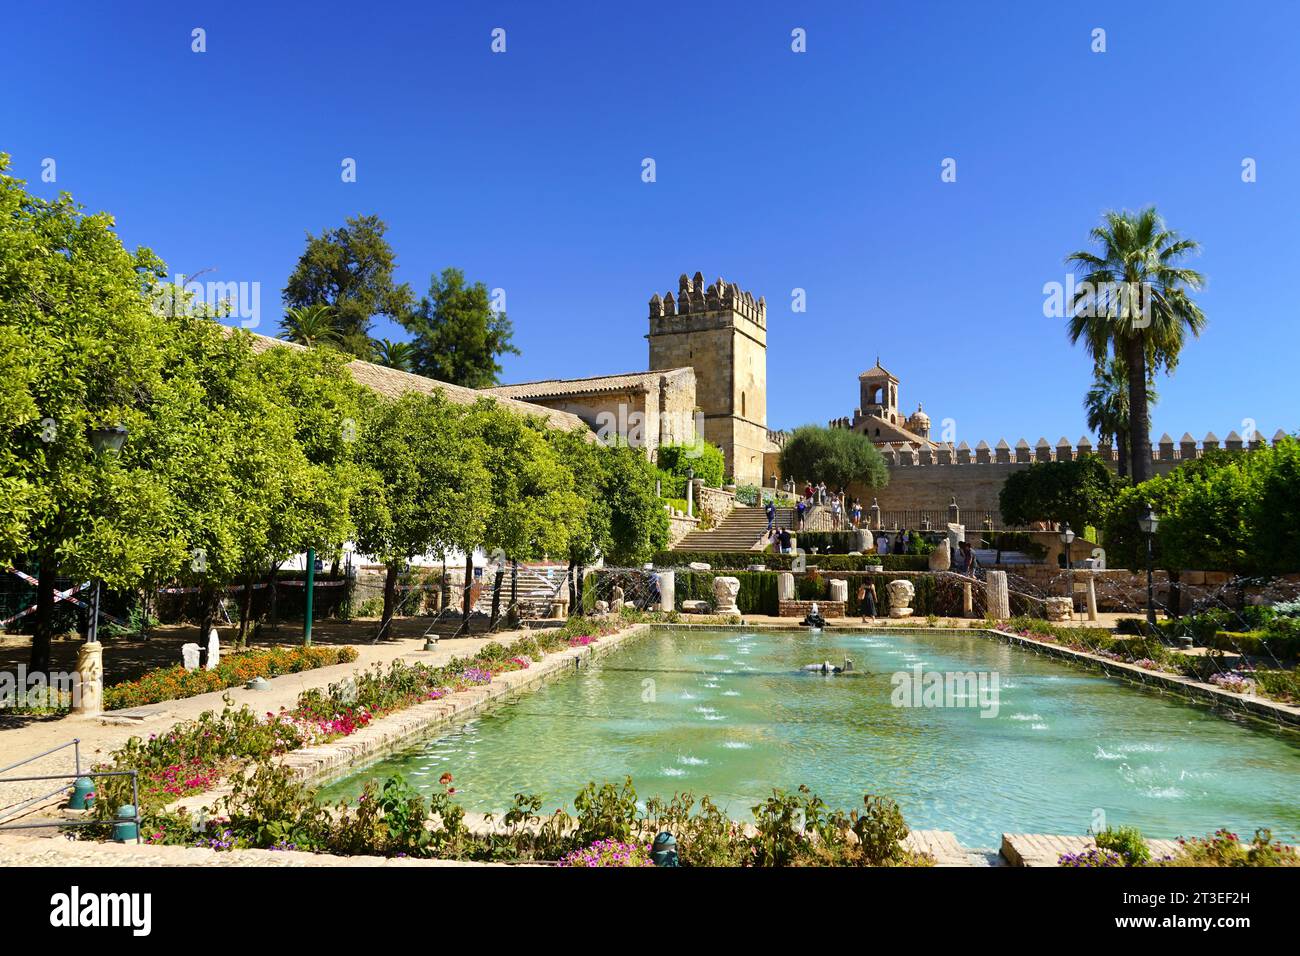 Spain, Andalusia, Cordoba: gardens of the Moorish Palace of the Alcazar de los Reyes Cristianos (Castle of the Christian Monarchs) with the Tower of t Stock Photo